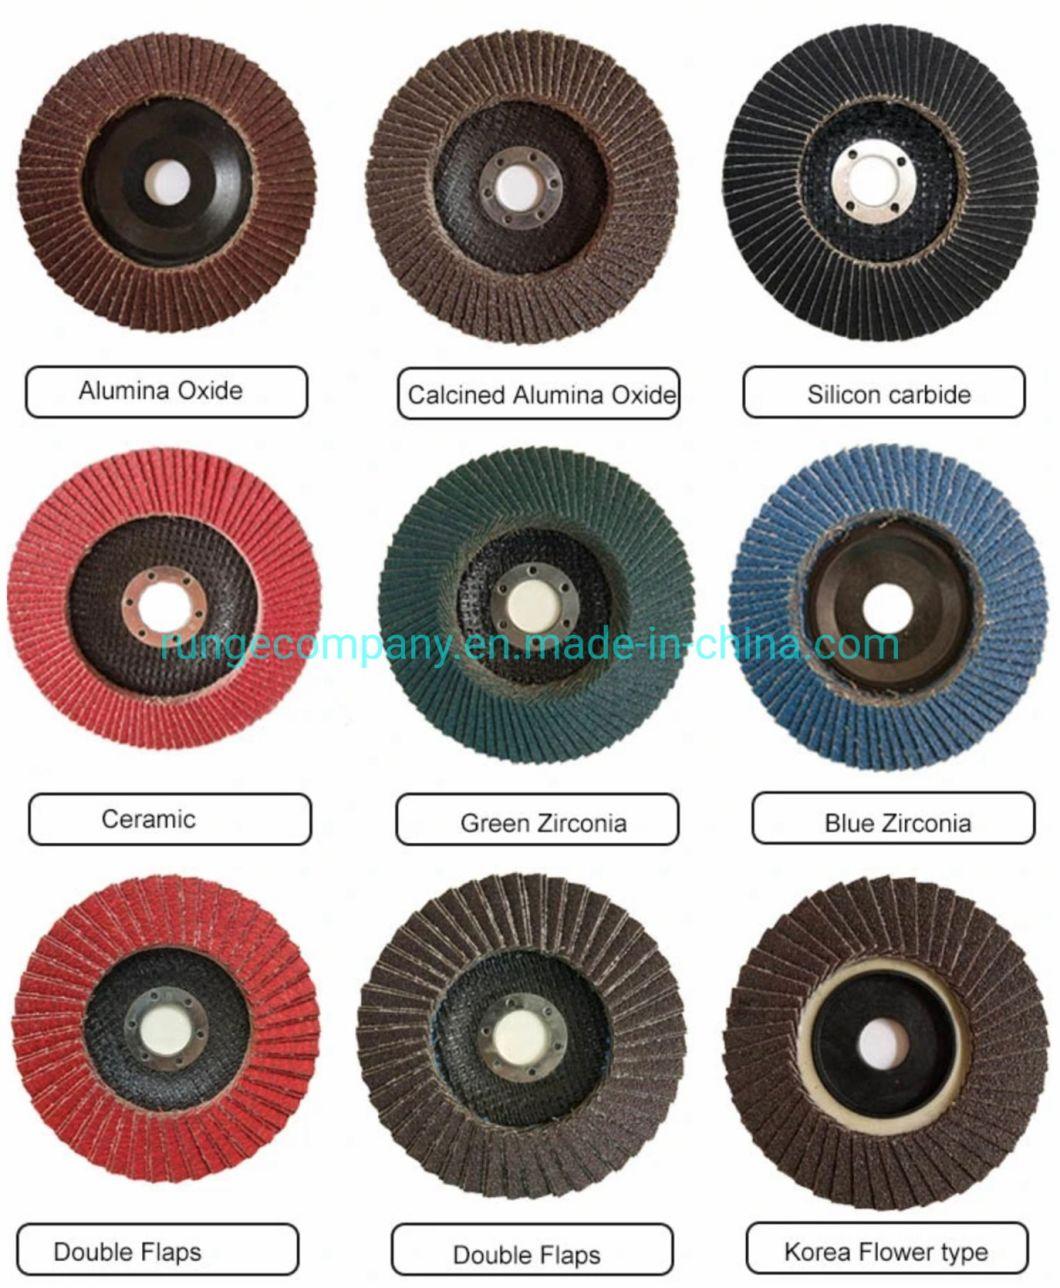 High Speed Power Electric Tools Accessories Cut-off Wheels - 14"X1/8"X1" Metal Portable Saw Cutting Discs Wheels